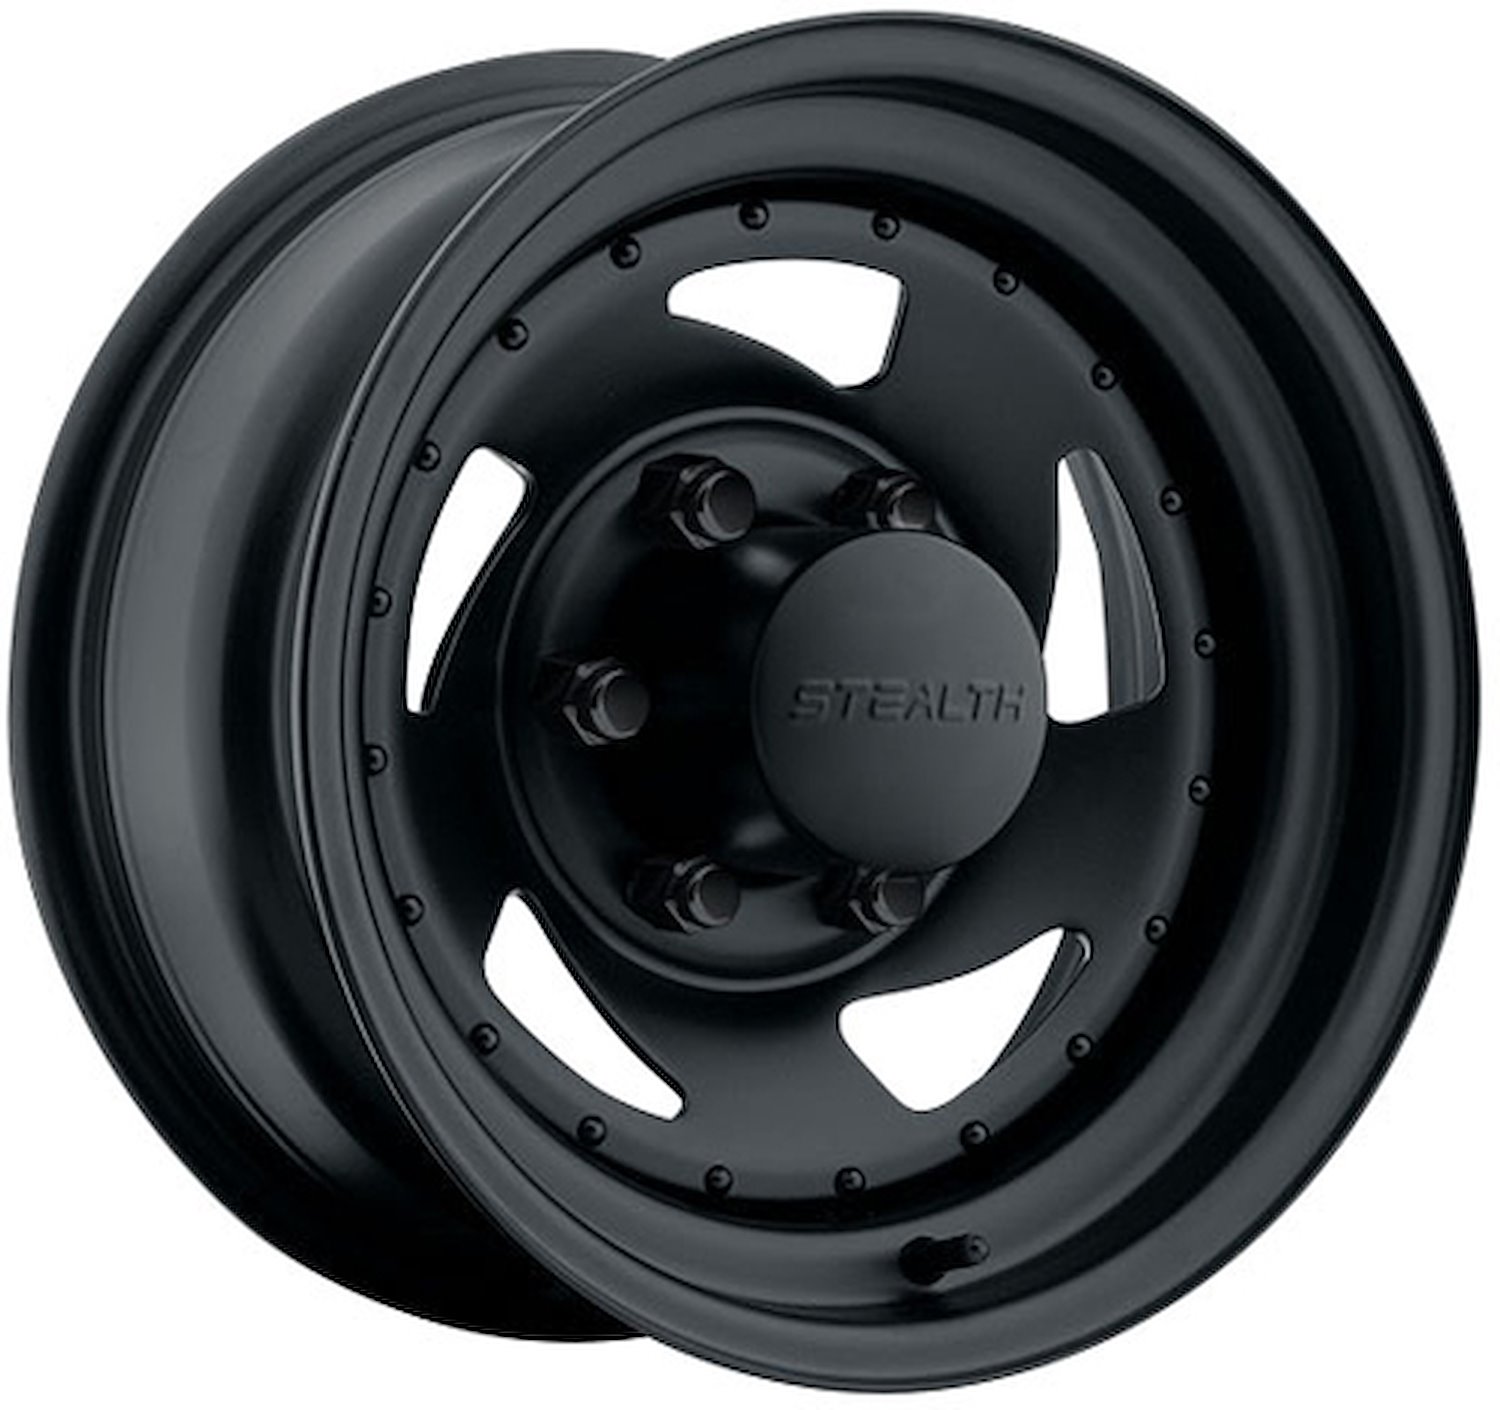 STEALTH BLACK BLADE 15 x 7 6 x 45 Bolt Circle 45 Back Spacing +13 offset 33 Center Bore 1600 lbs Load Rating